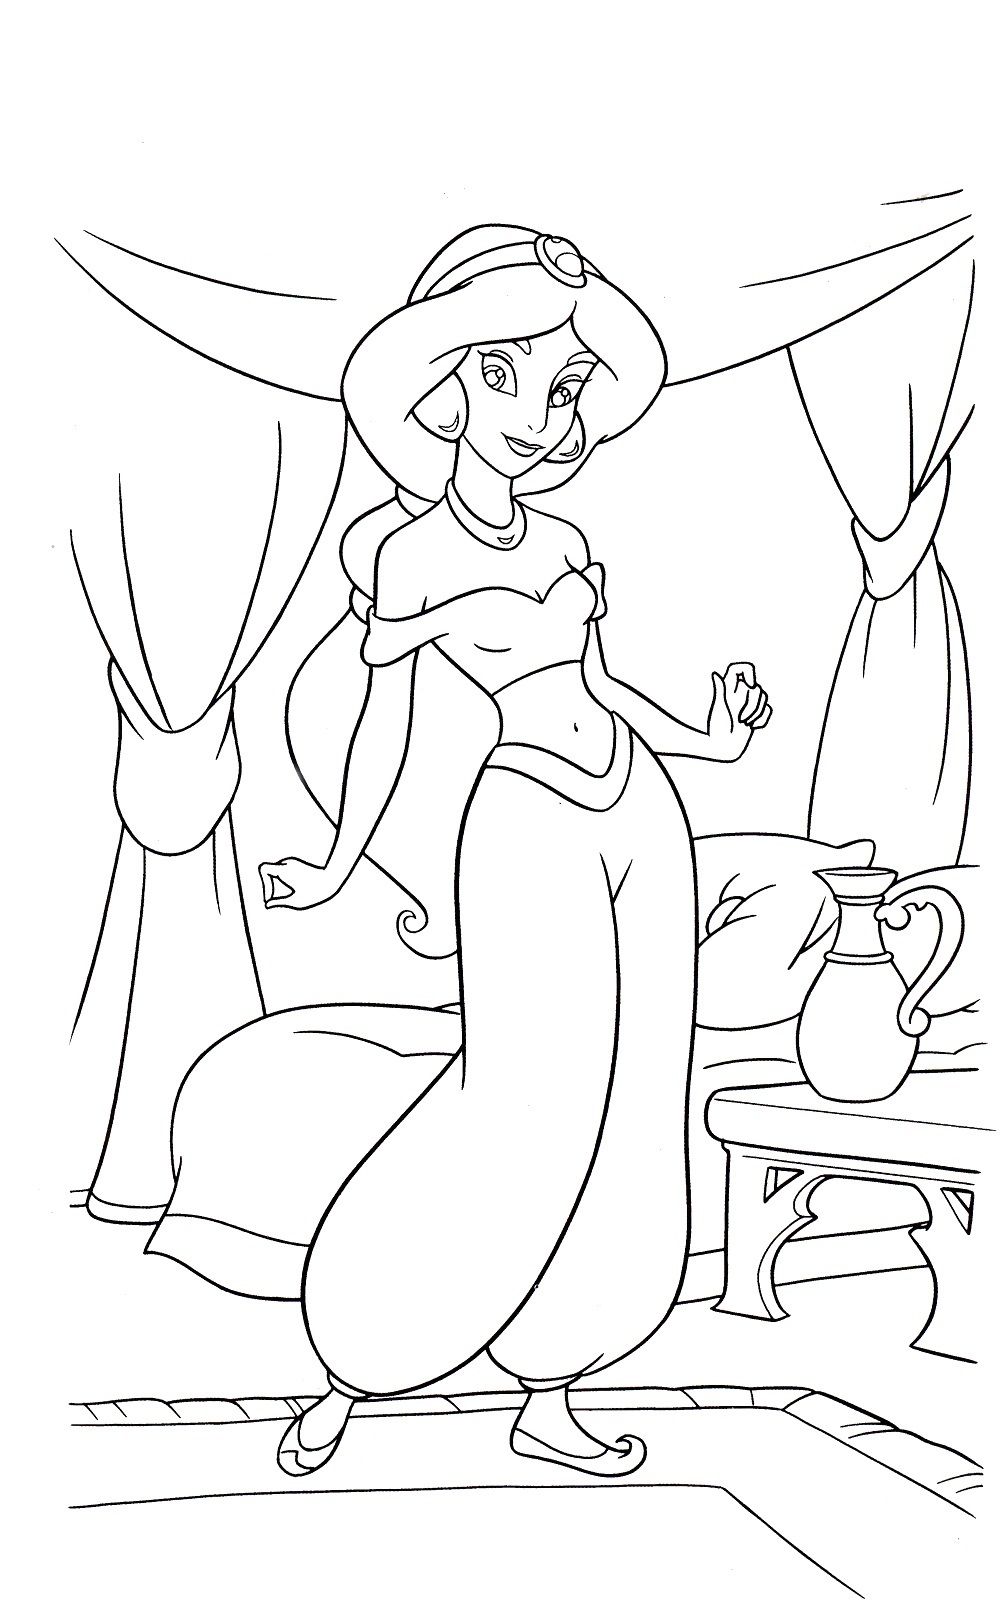 Download Free Printable Jasmine Coloring Pages For Kids - Best Coloring Pages For Kids